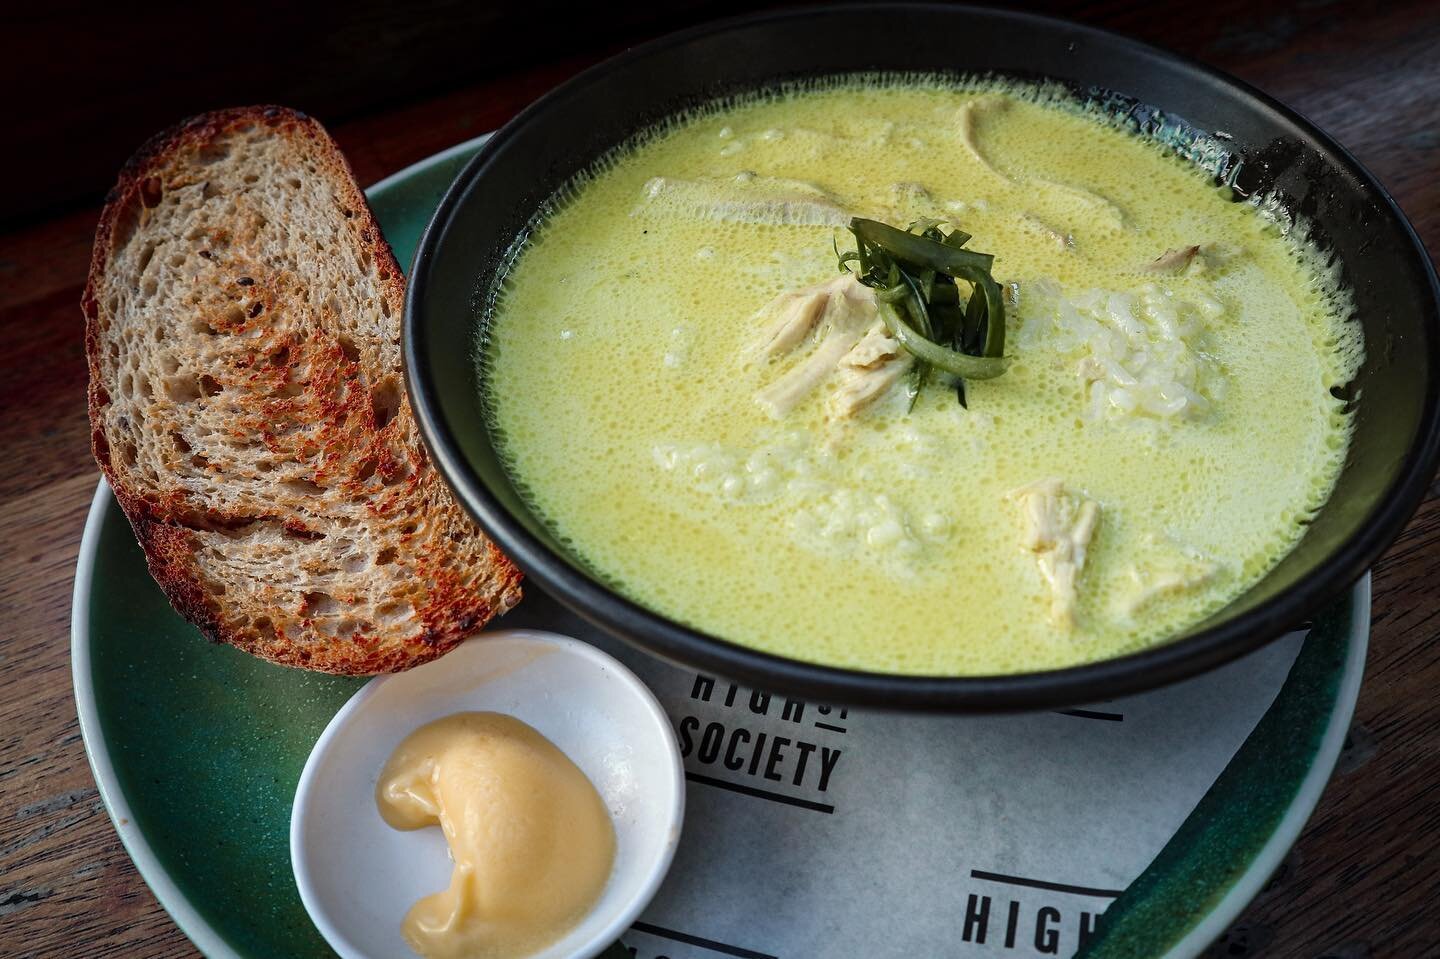 If you LOVE a bowl of warm goodness, you&rsquo;re going to savour our Coconut, Ginger and Lemon soup.
.
.
.
#sydneyfood #brunchtime #coconutsoup #sourdoughbread #warmandcozy #soupseason